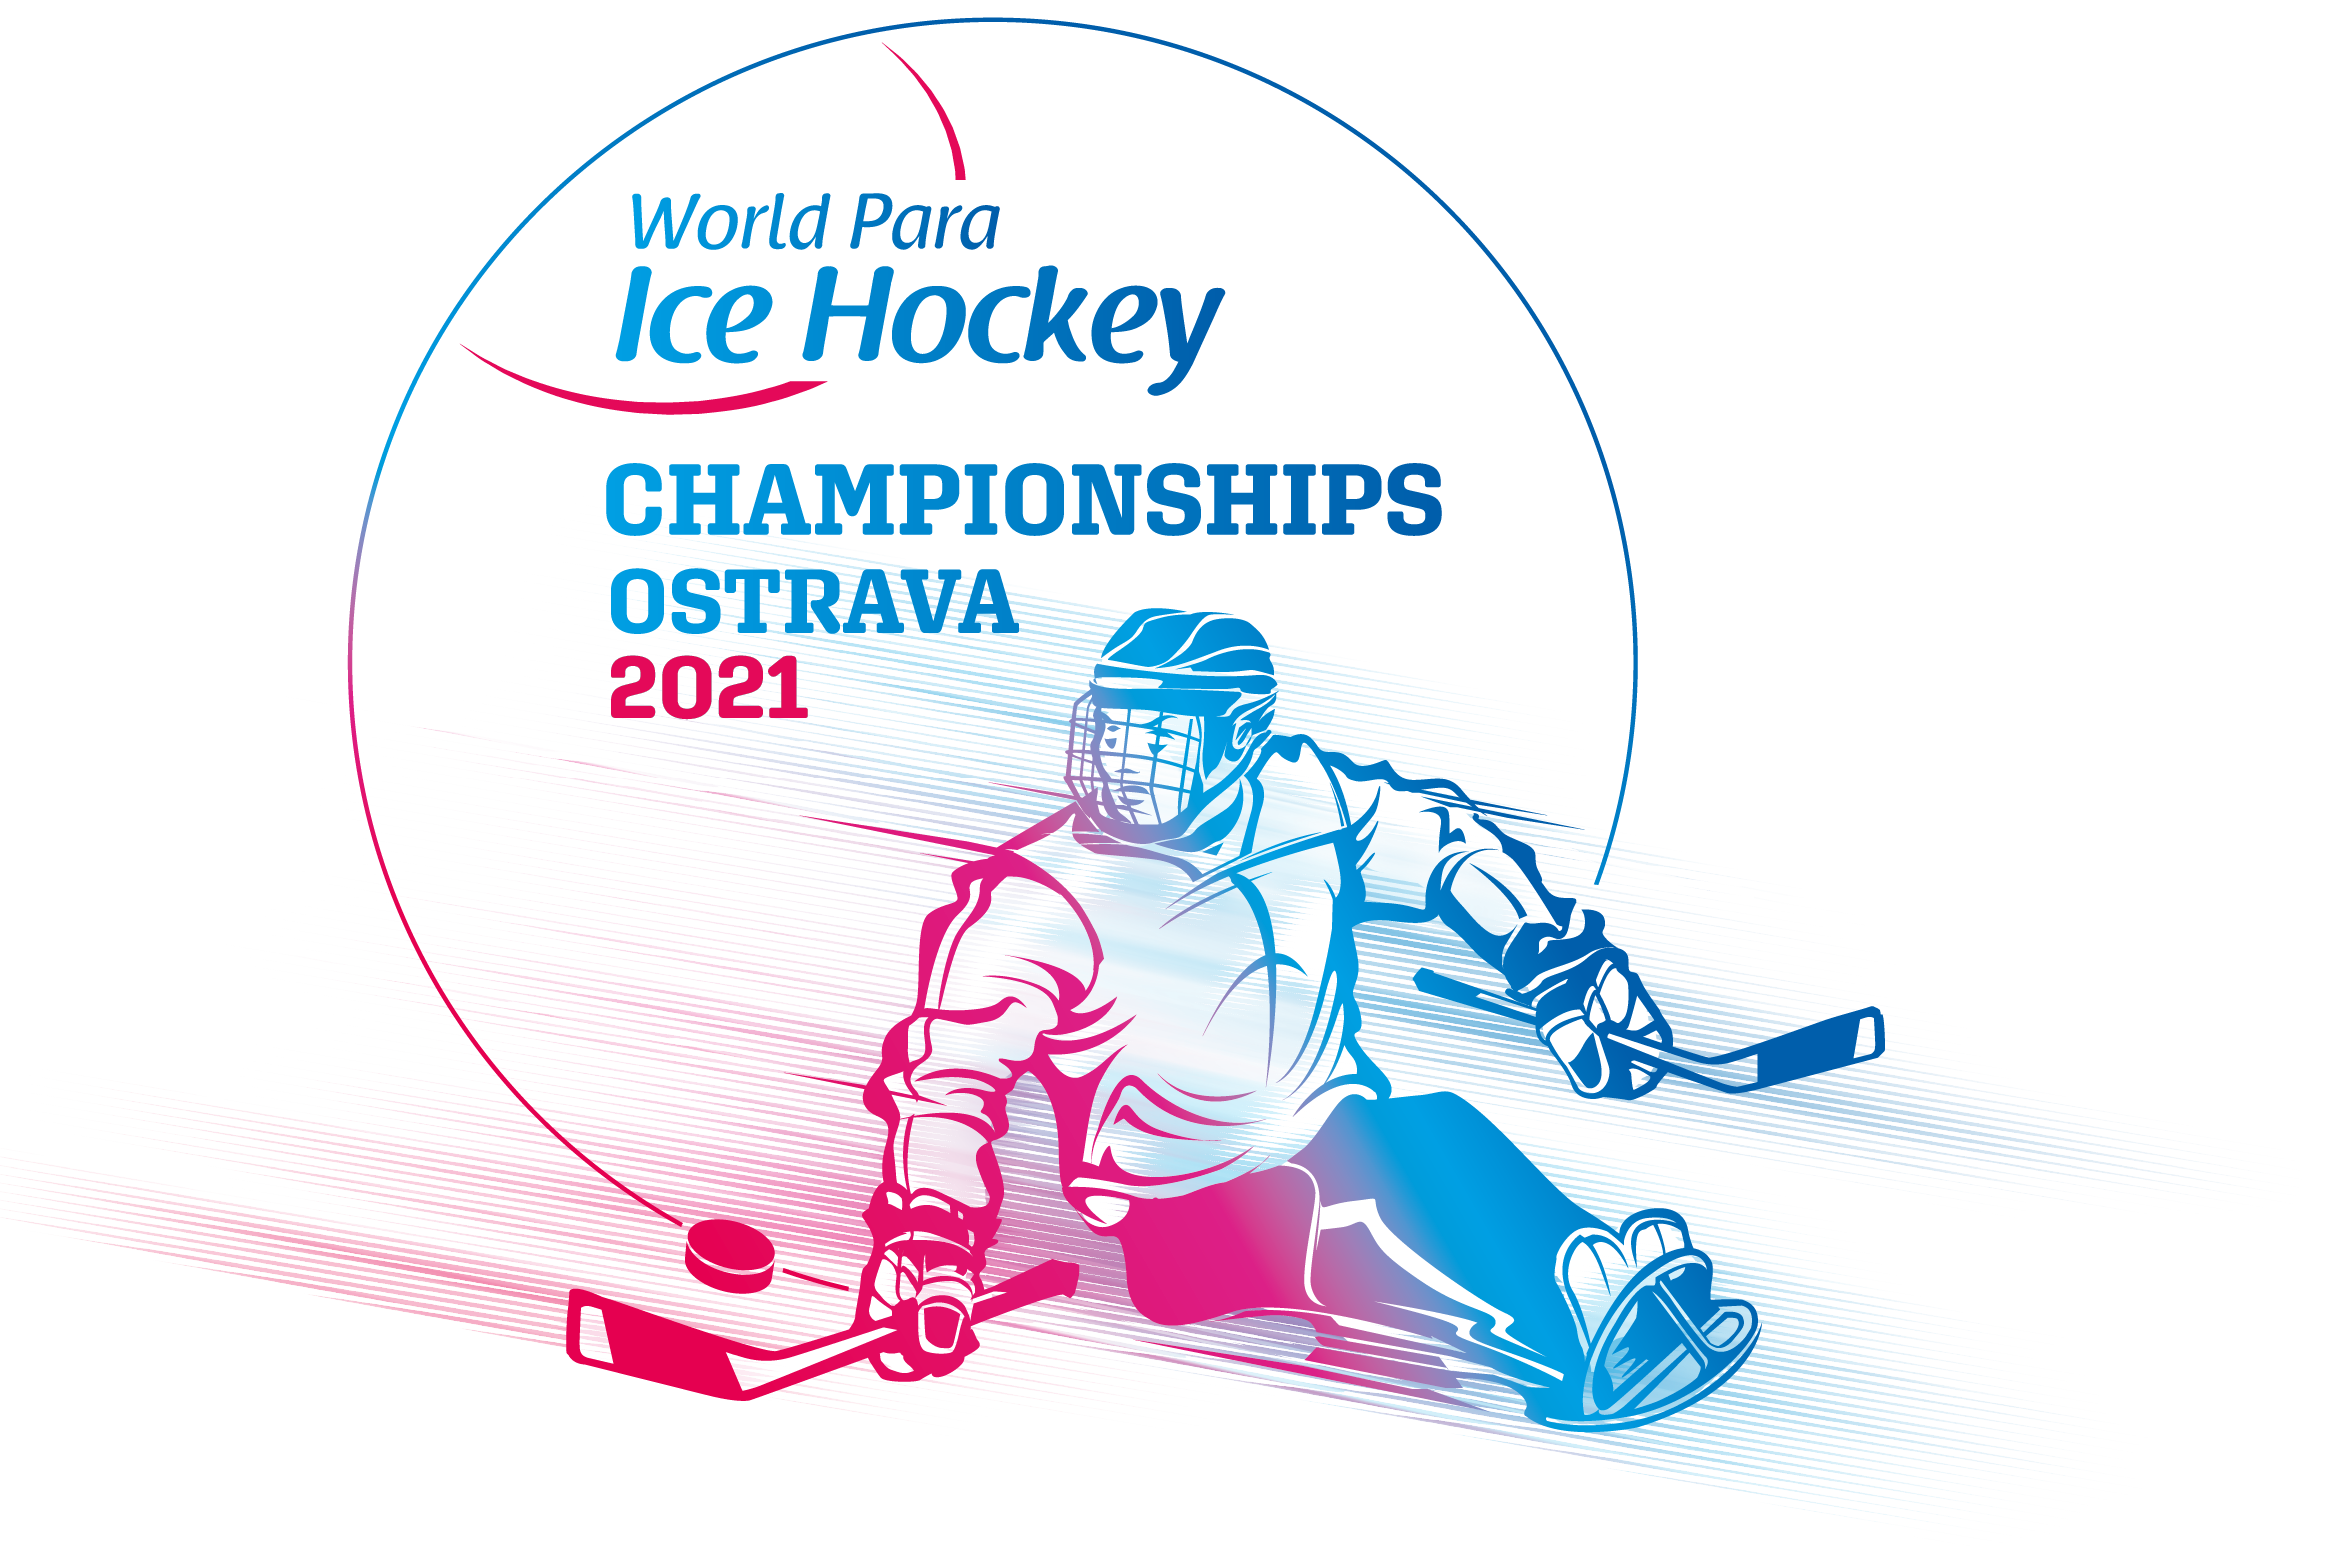 World Para Ice Hockey statement on withdrawal of two team members from